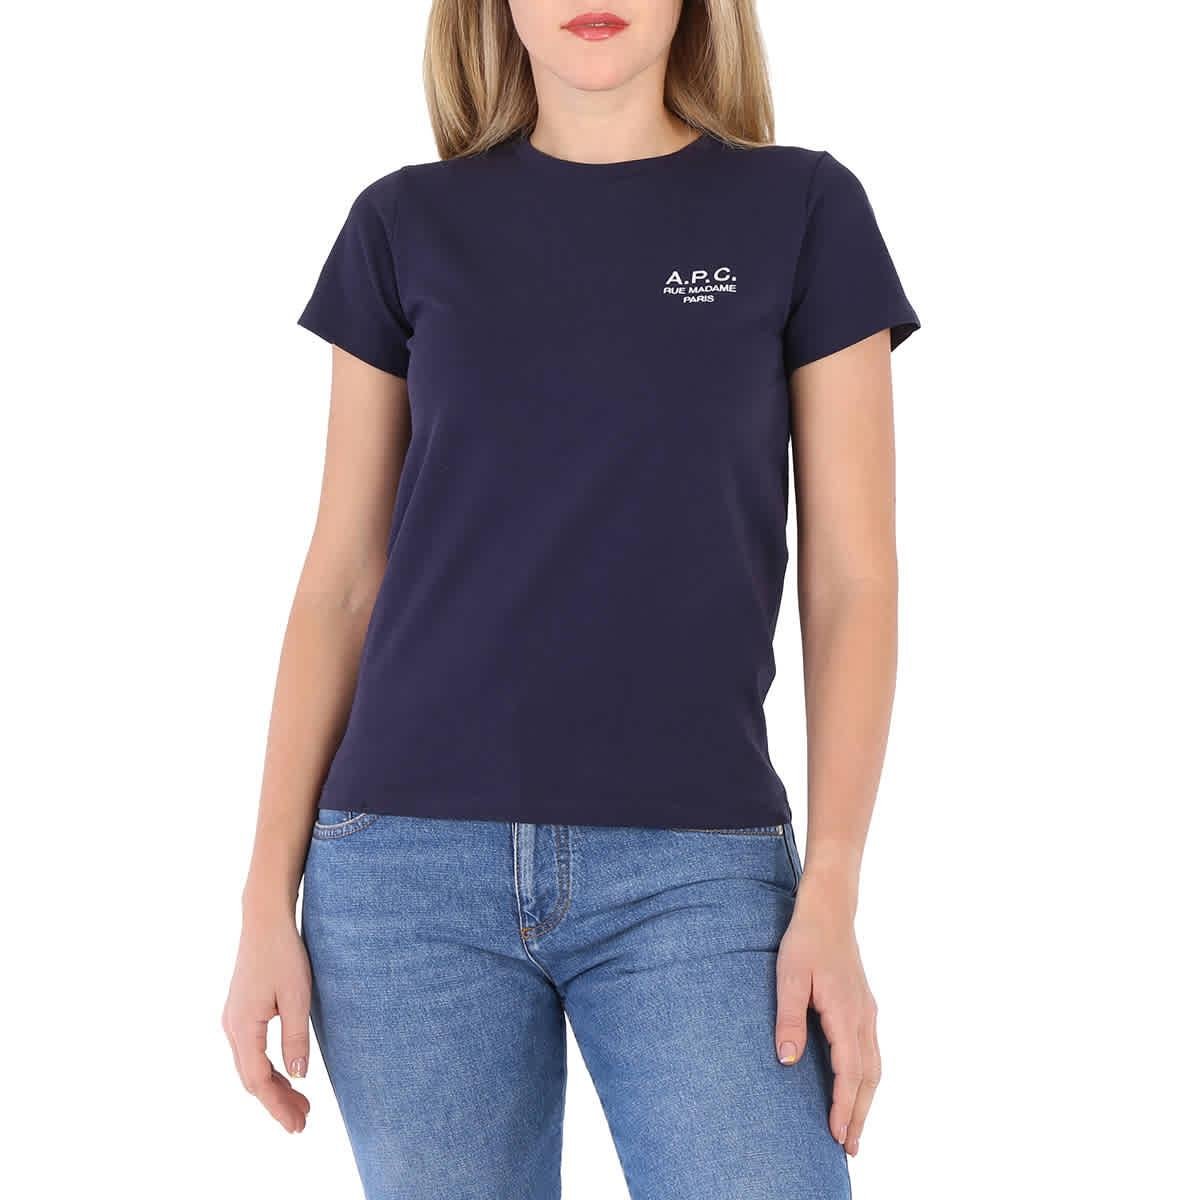 A.P.C. Dark Navy Denise Embroidered Logo T-Shirt by A.P.C.